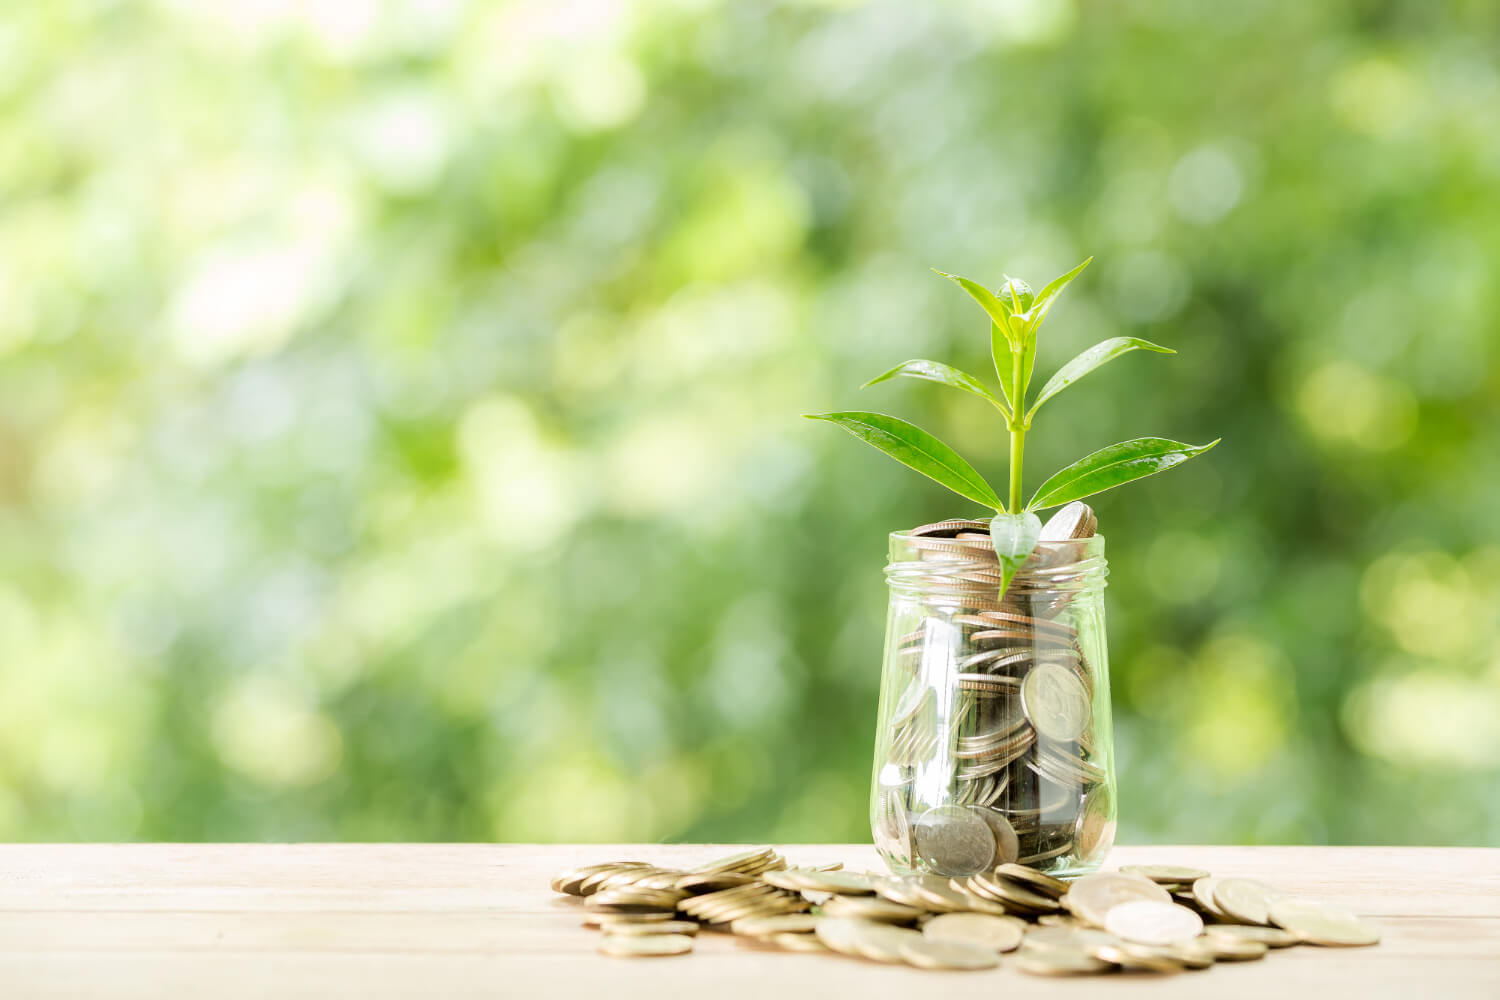 plant-growing-from-coins-glass-jar-blurred-nature